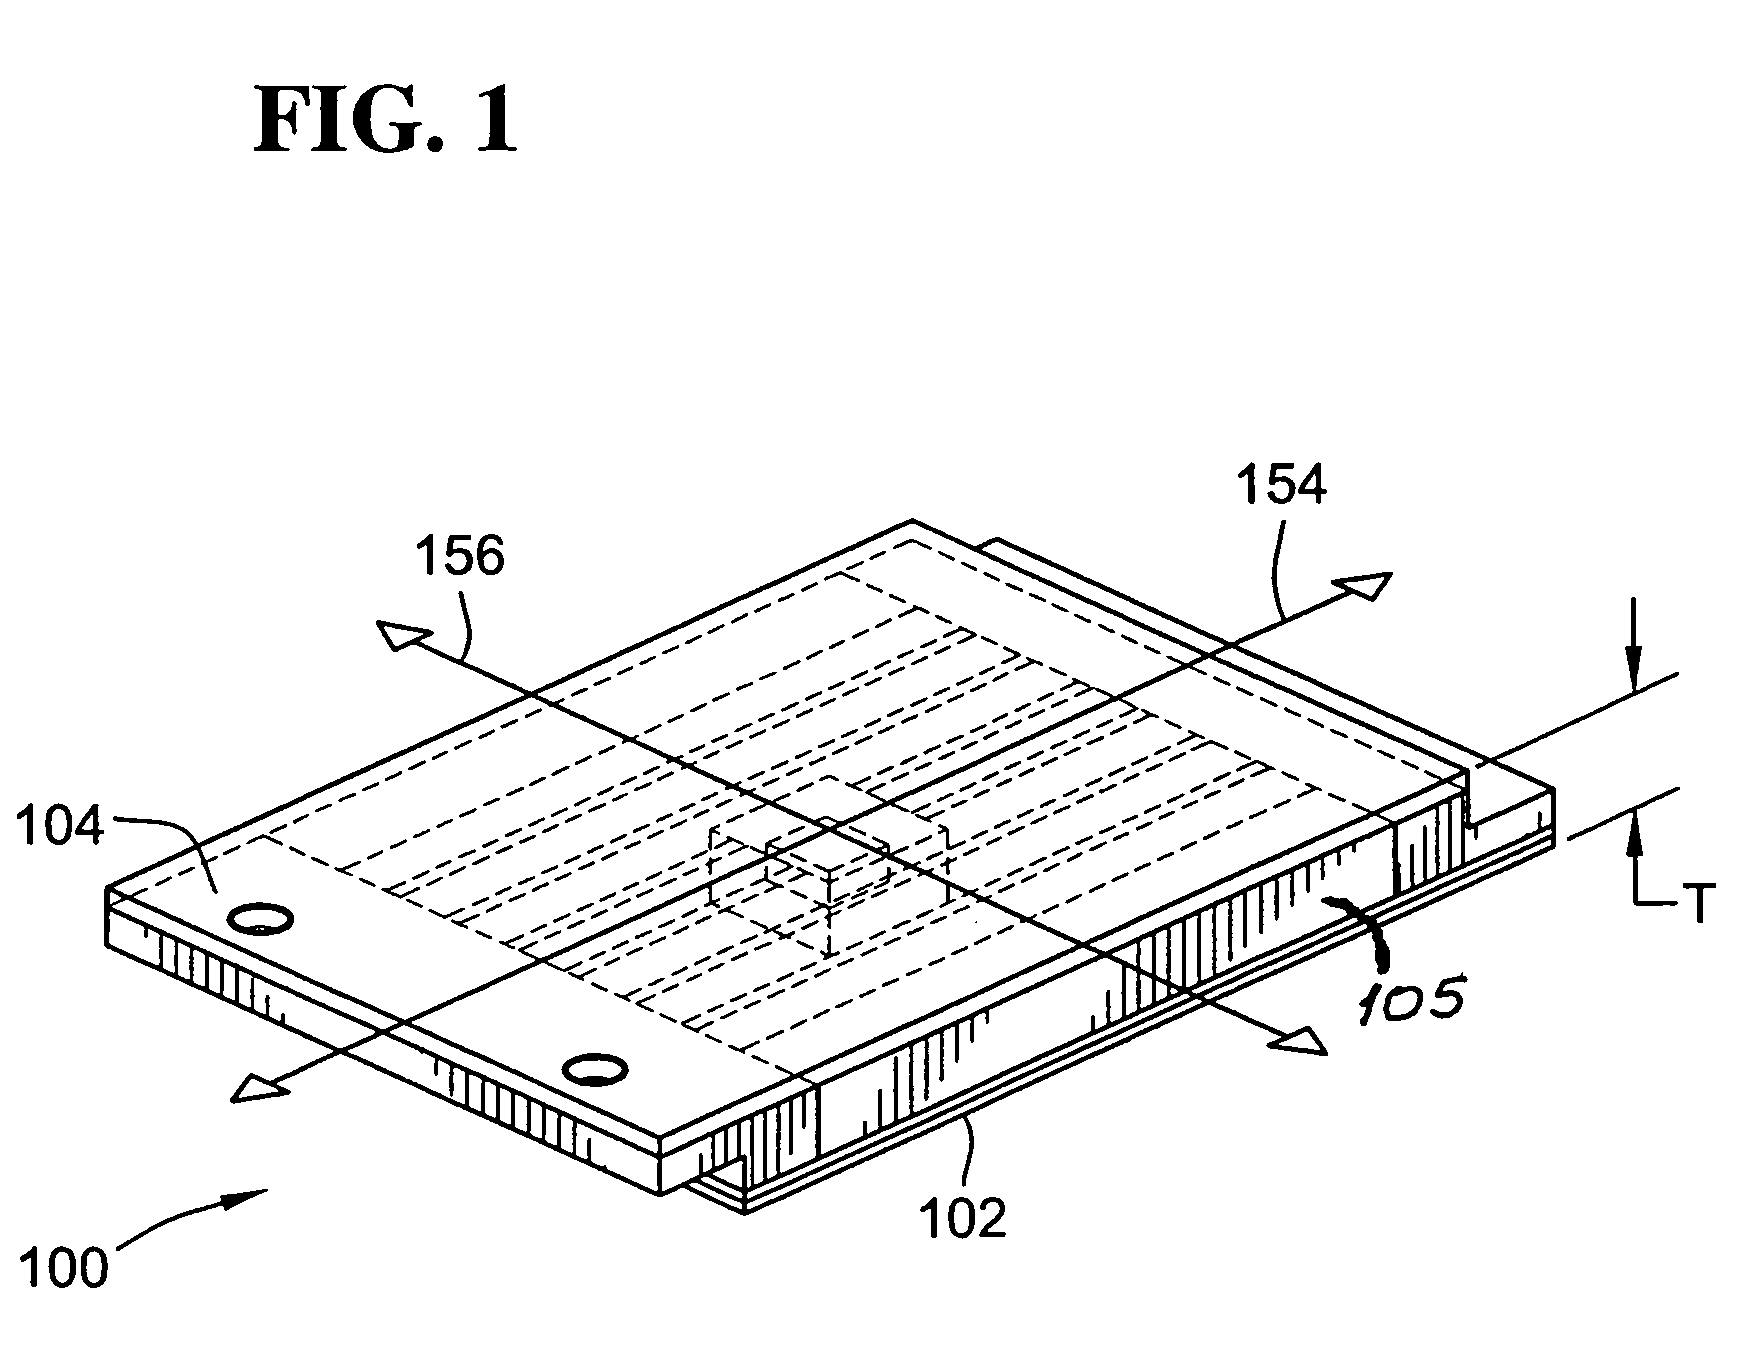 Fire retardant panel apparatus and method of making and using same